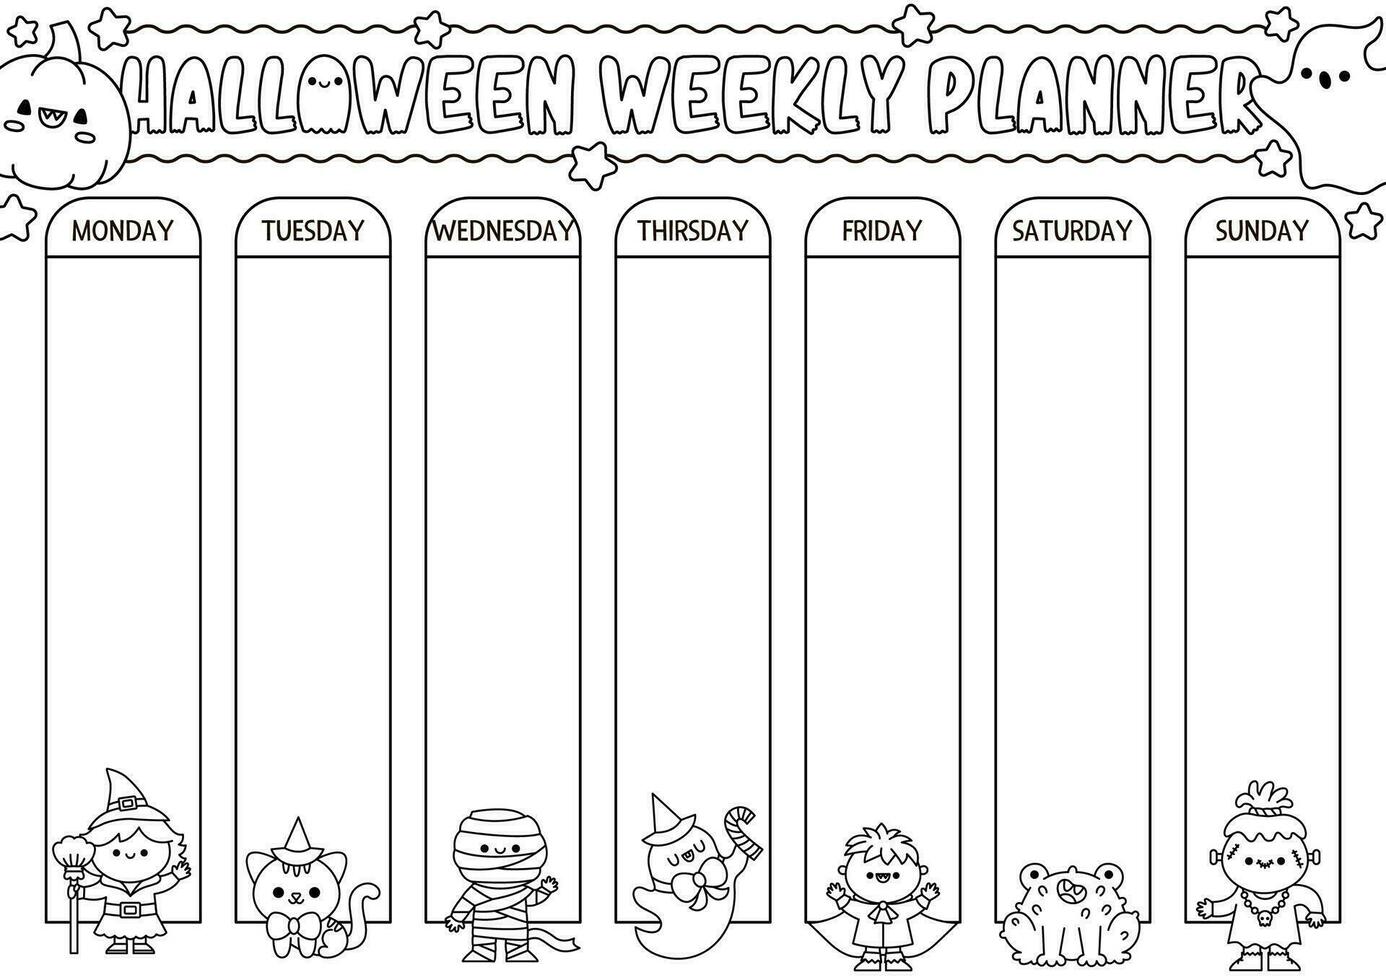 Vector black and white Halloween weekly planner with traditional holiday symbols. Cute autumn all saints day calendar or timetable for kids. Scary trick or treat coloring poster with kawaii witch